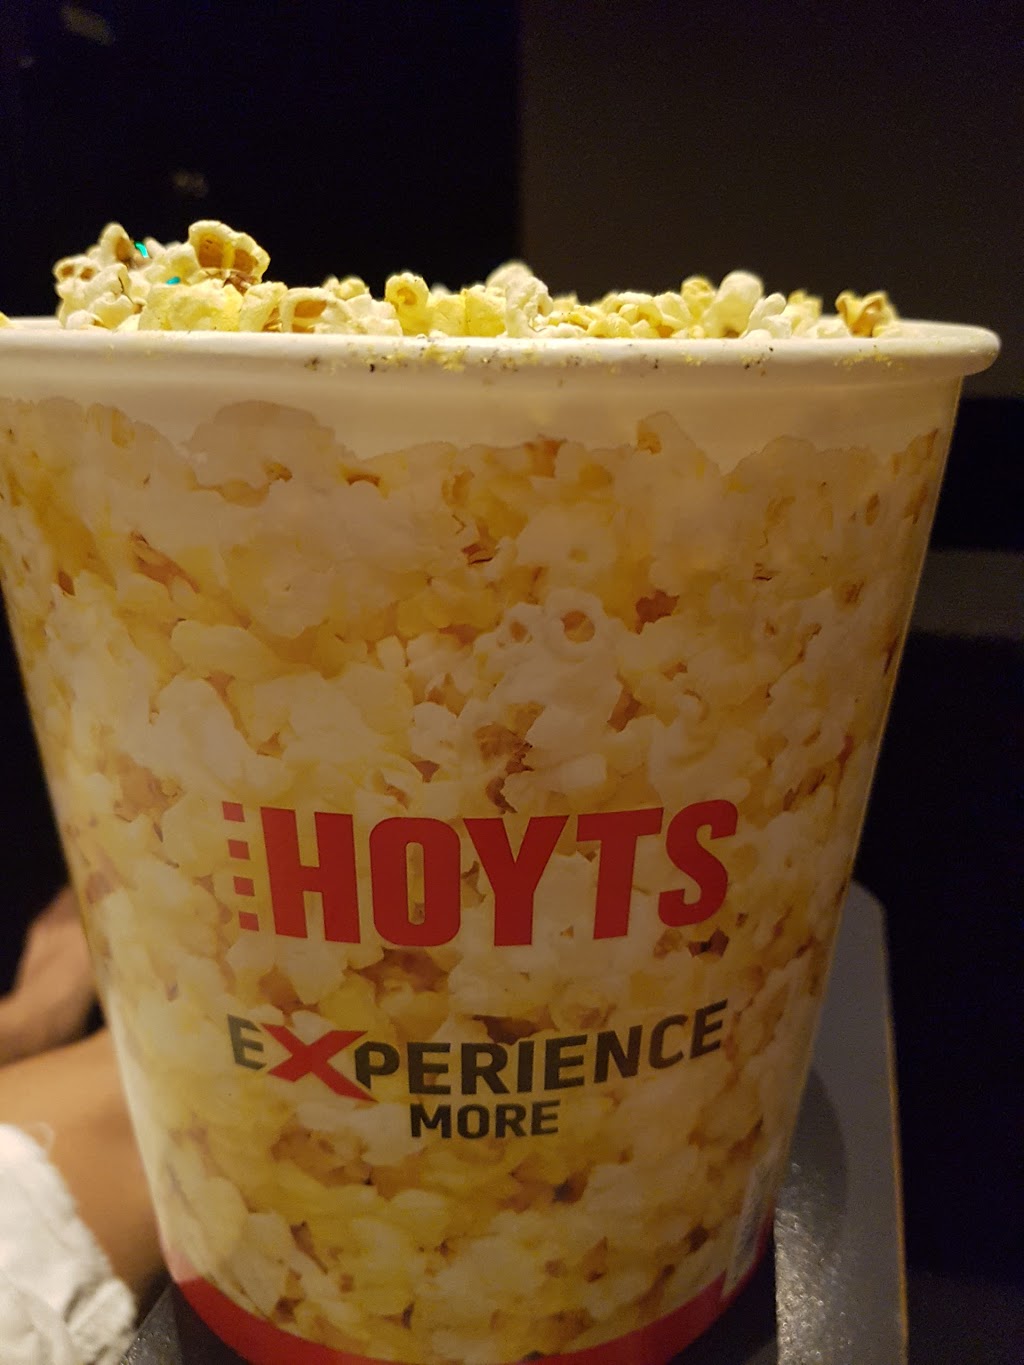 HOYTS Wetherill Park | movie theater | 561-583 Polding St, Wetherill Park NSW 2164, Australia | 0290033910 OR +61 2 9003 3910